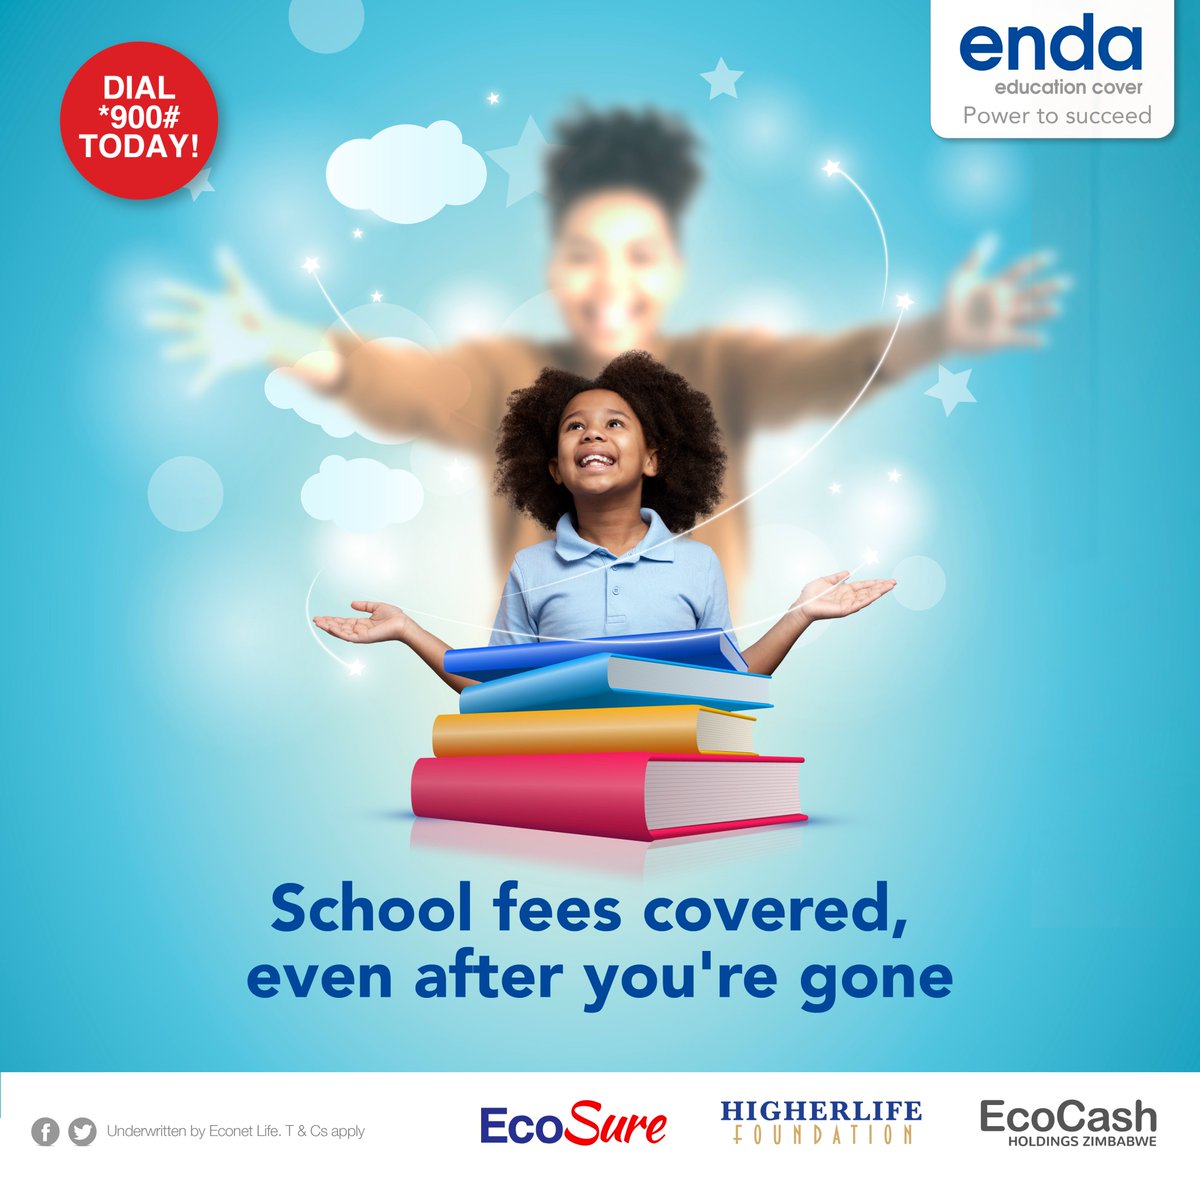 #Sponsored 🔴Invest in their dreams for as little as $2.50 and allow your child access to up to $6,000 in education cover per term in the event of the unexpected. Sign up today ecosure.co.zw/enda-education… #Enda Education #EcoSure